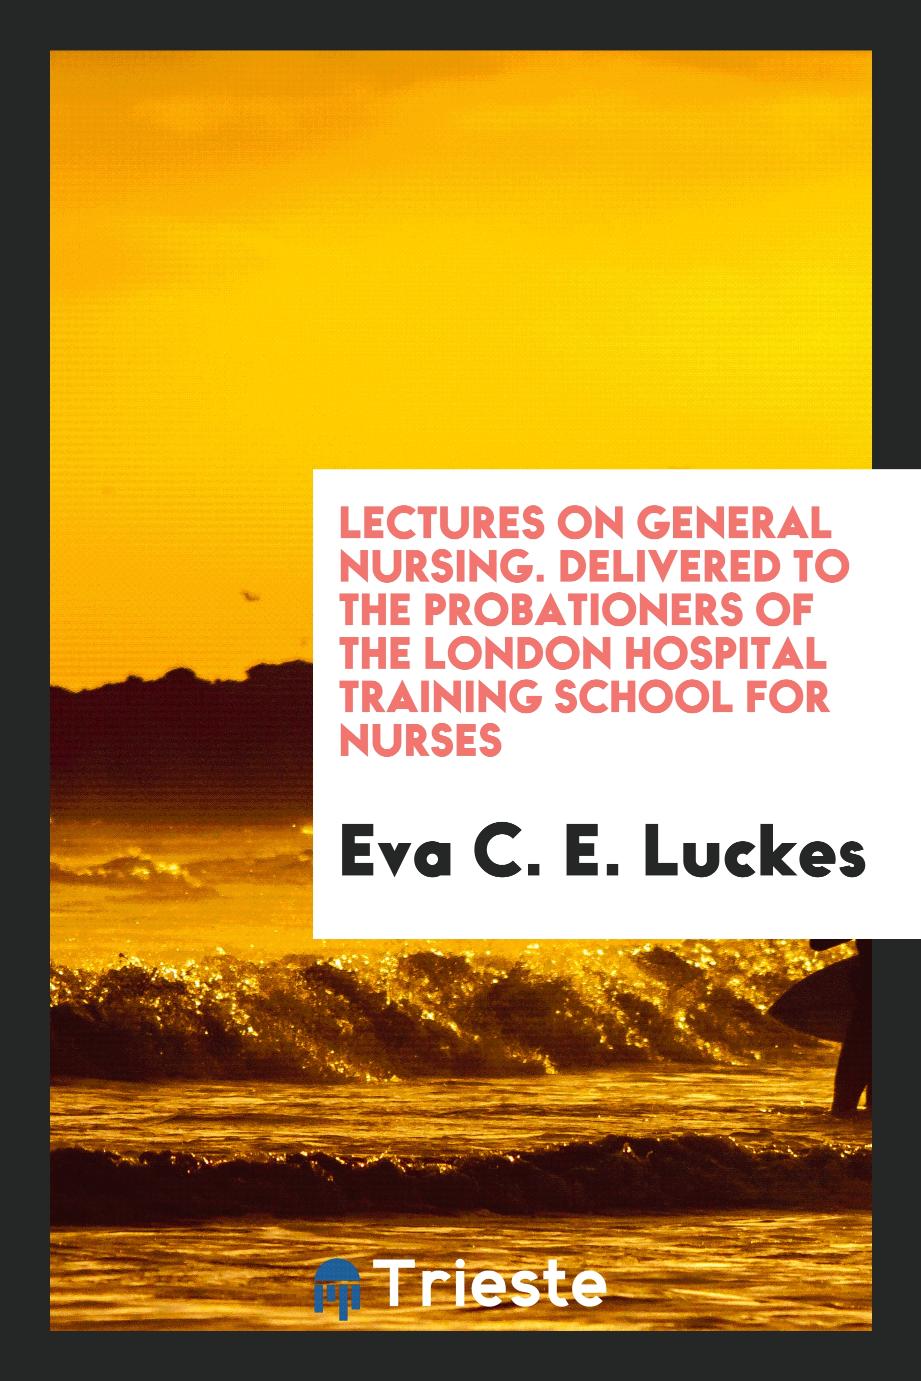 Lectures on General Nursing. Delivered to the Probationers of the London Hospital Training School for Nurses